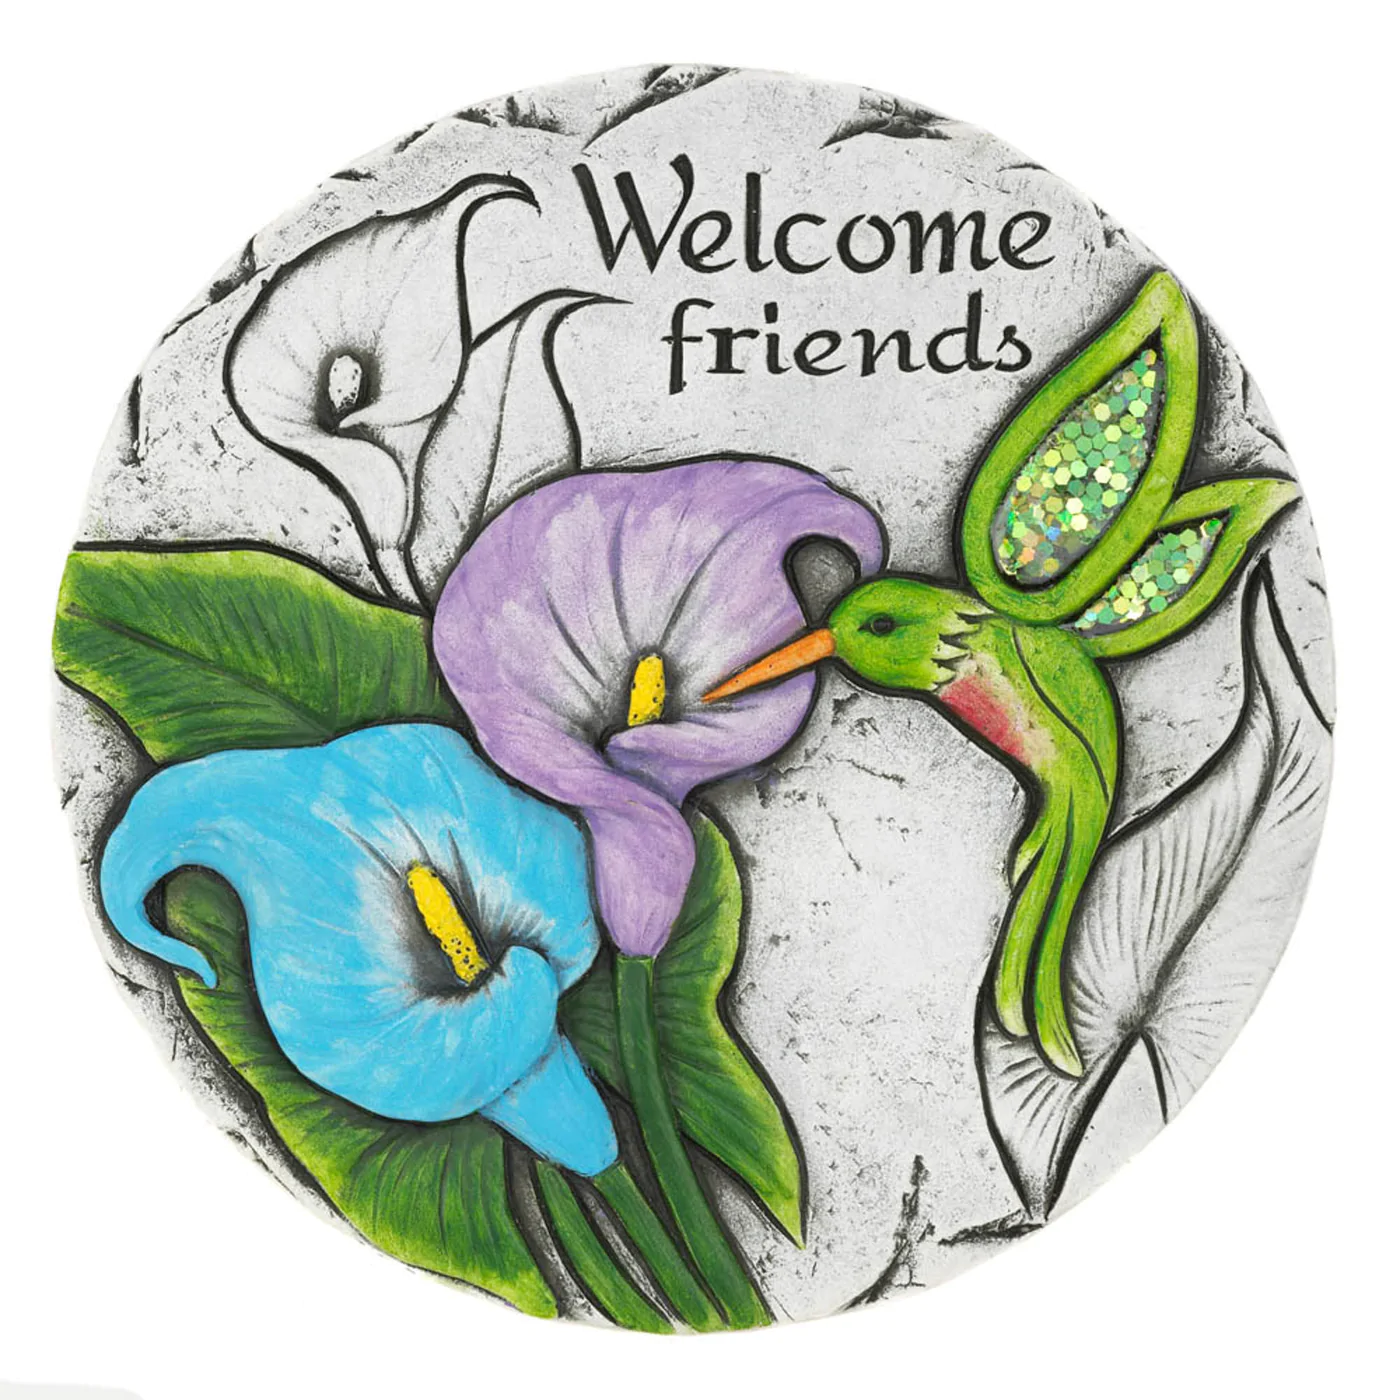 Welcome Friends Stepping Stone - $22.96